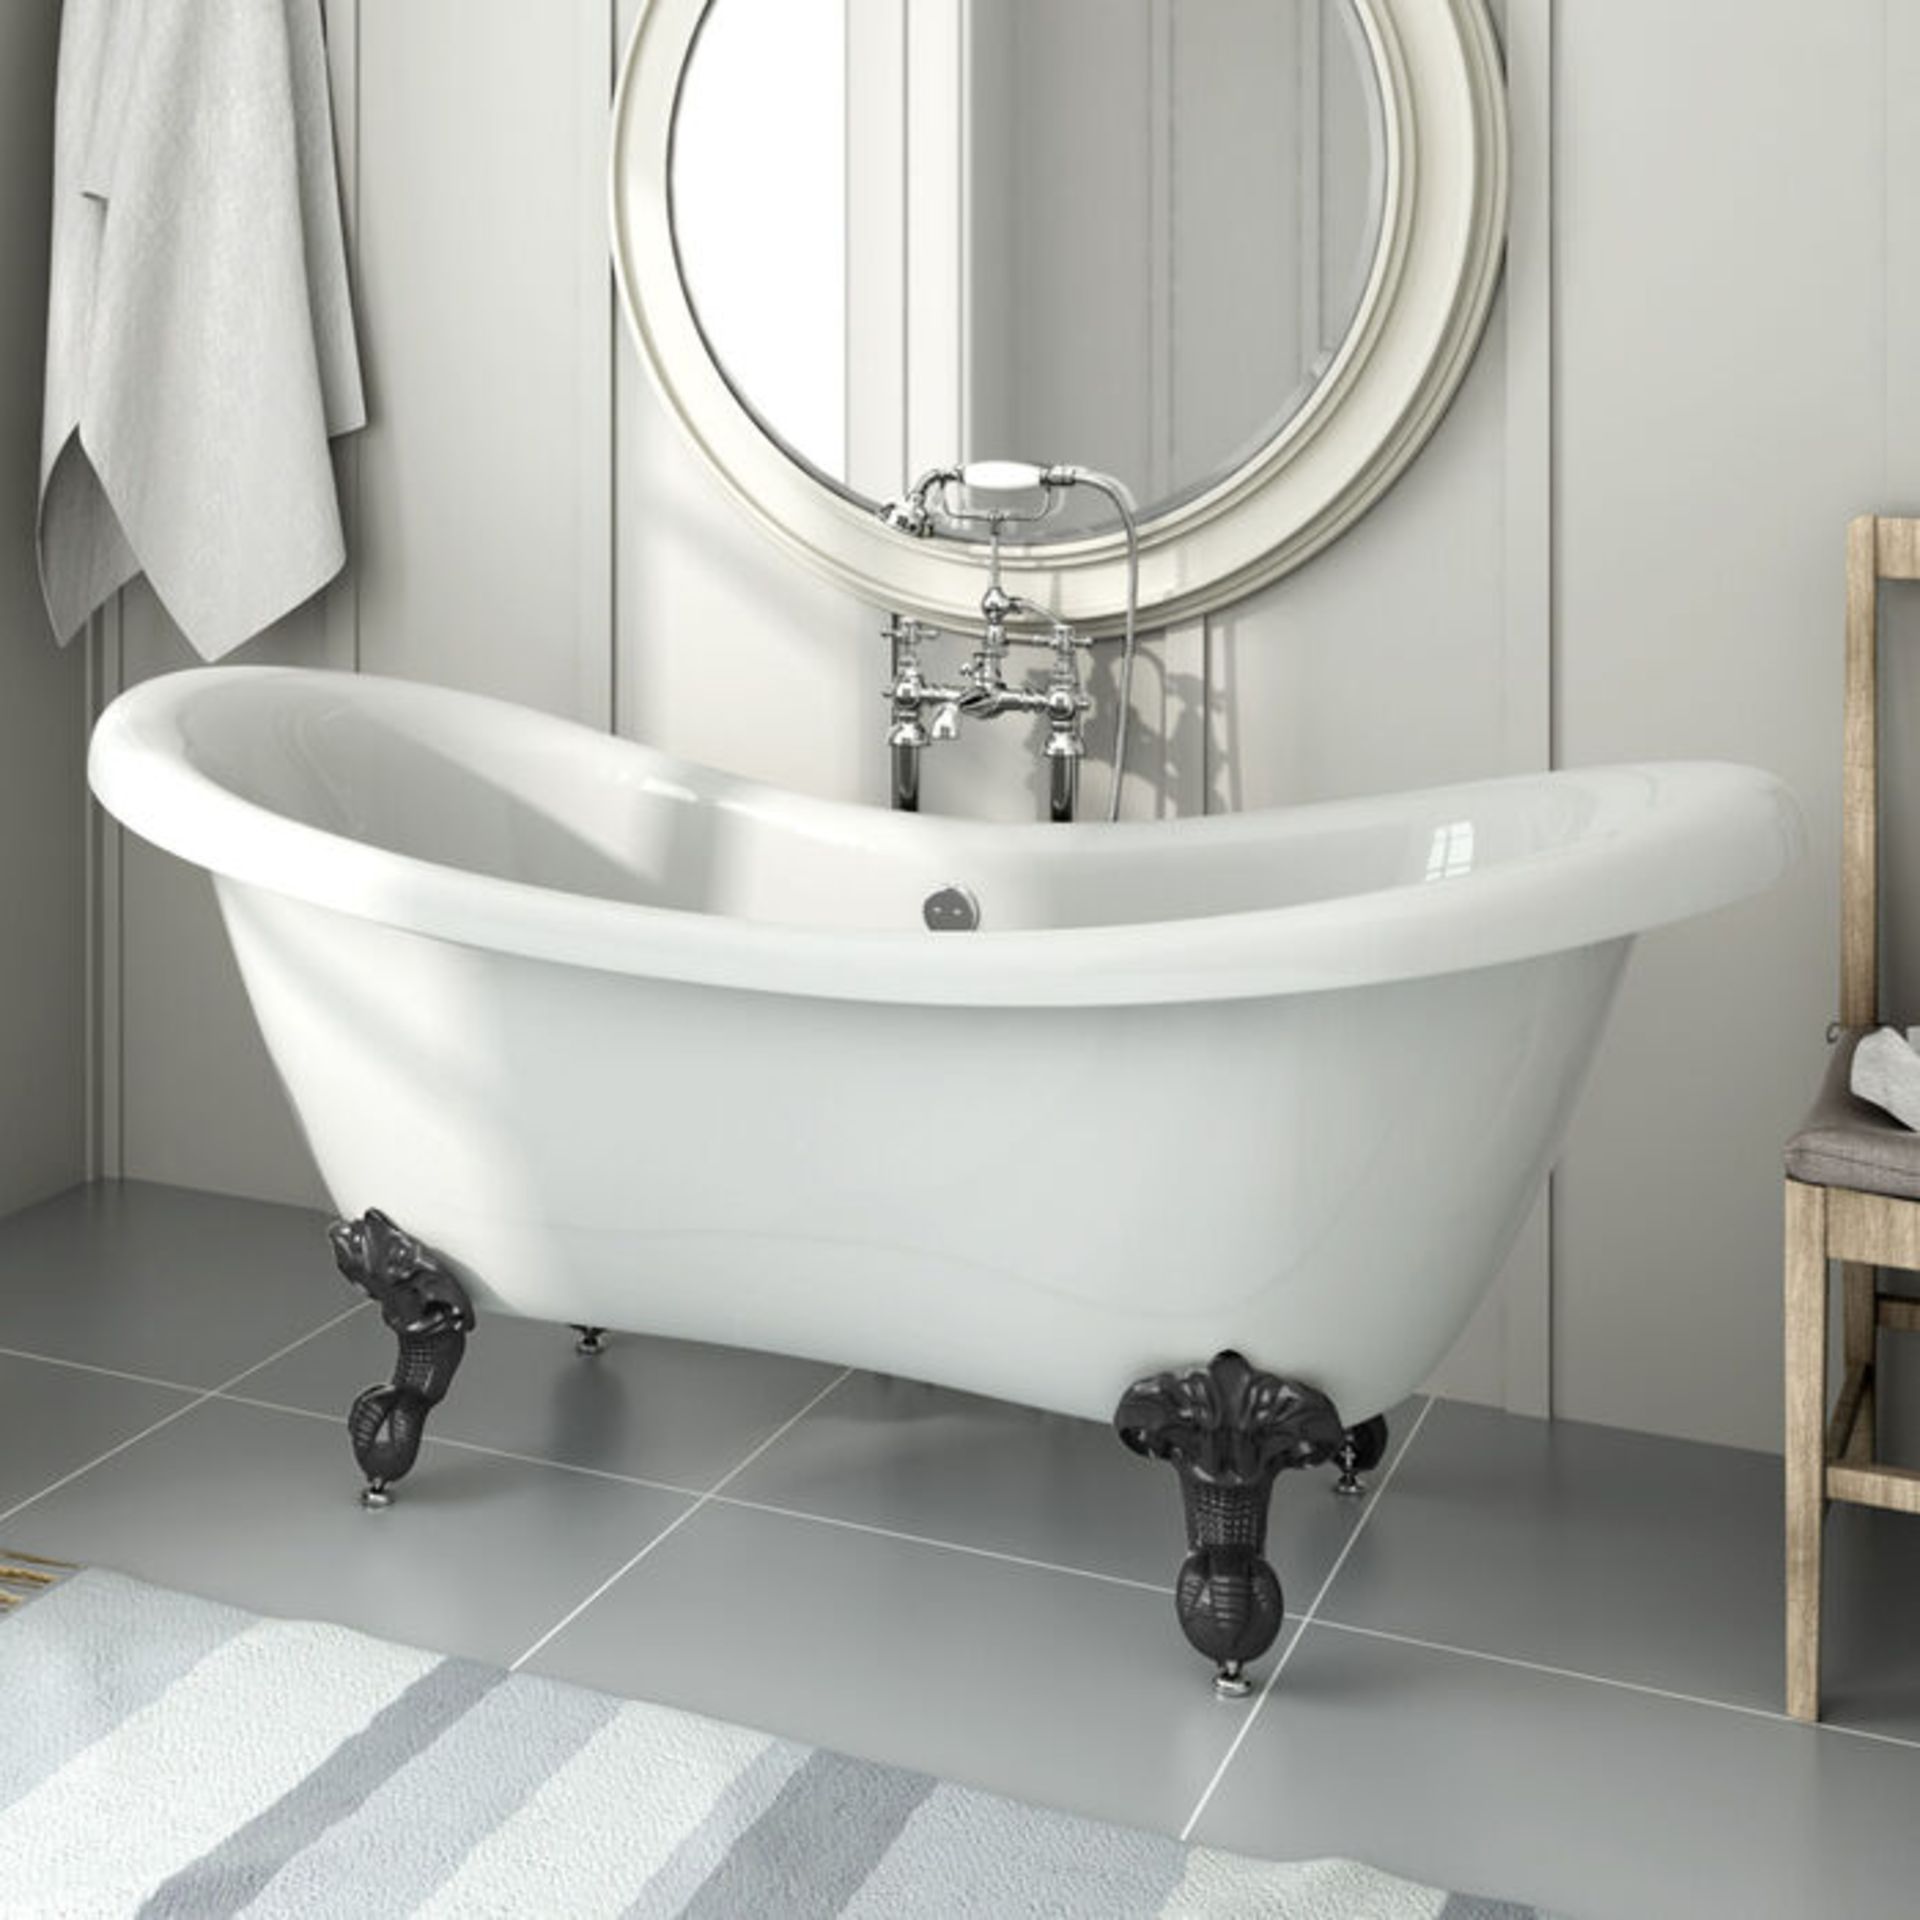 (Z2) 1600mm Cambridge Traditional Roll Top Double Slipper Bath - Black Ball Feet. RRP £699.99.... - Image 3 of 5